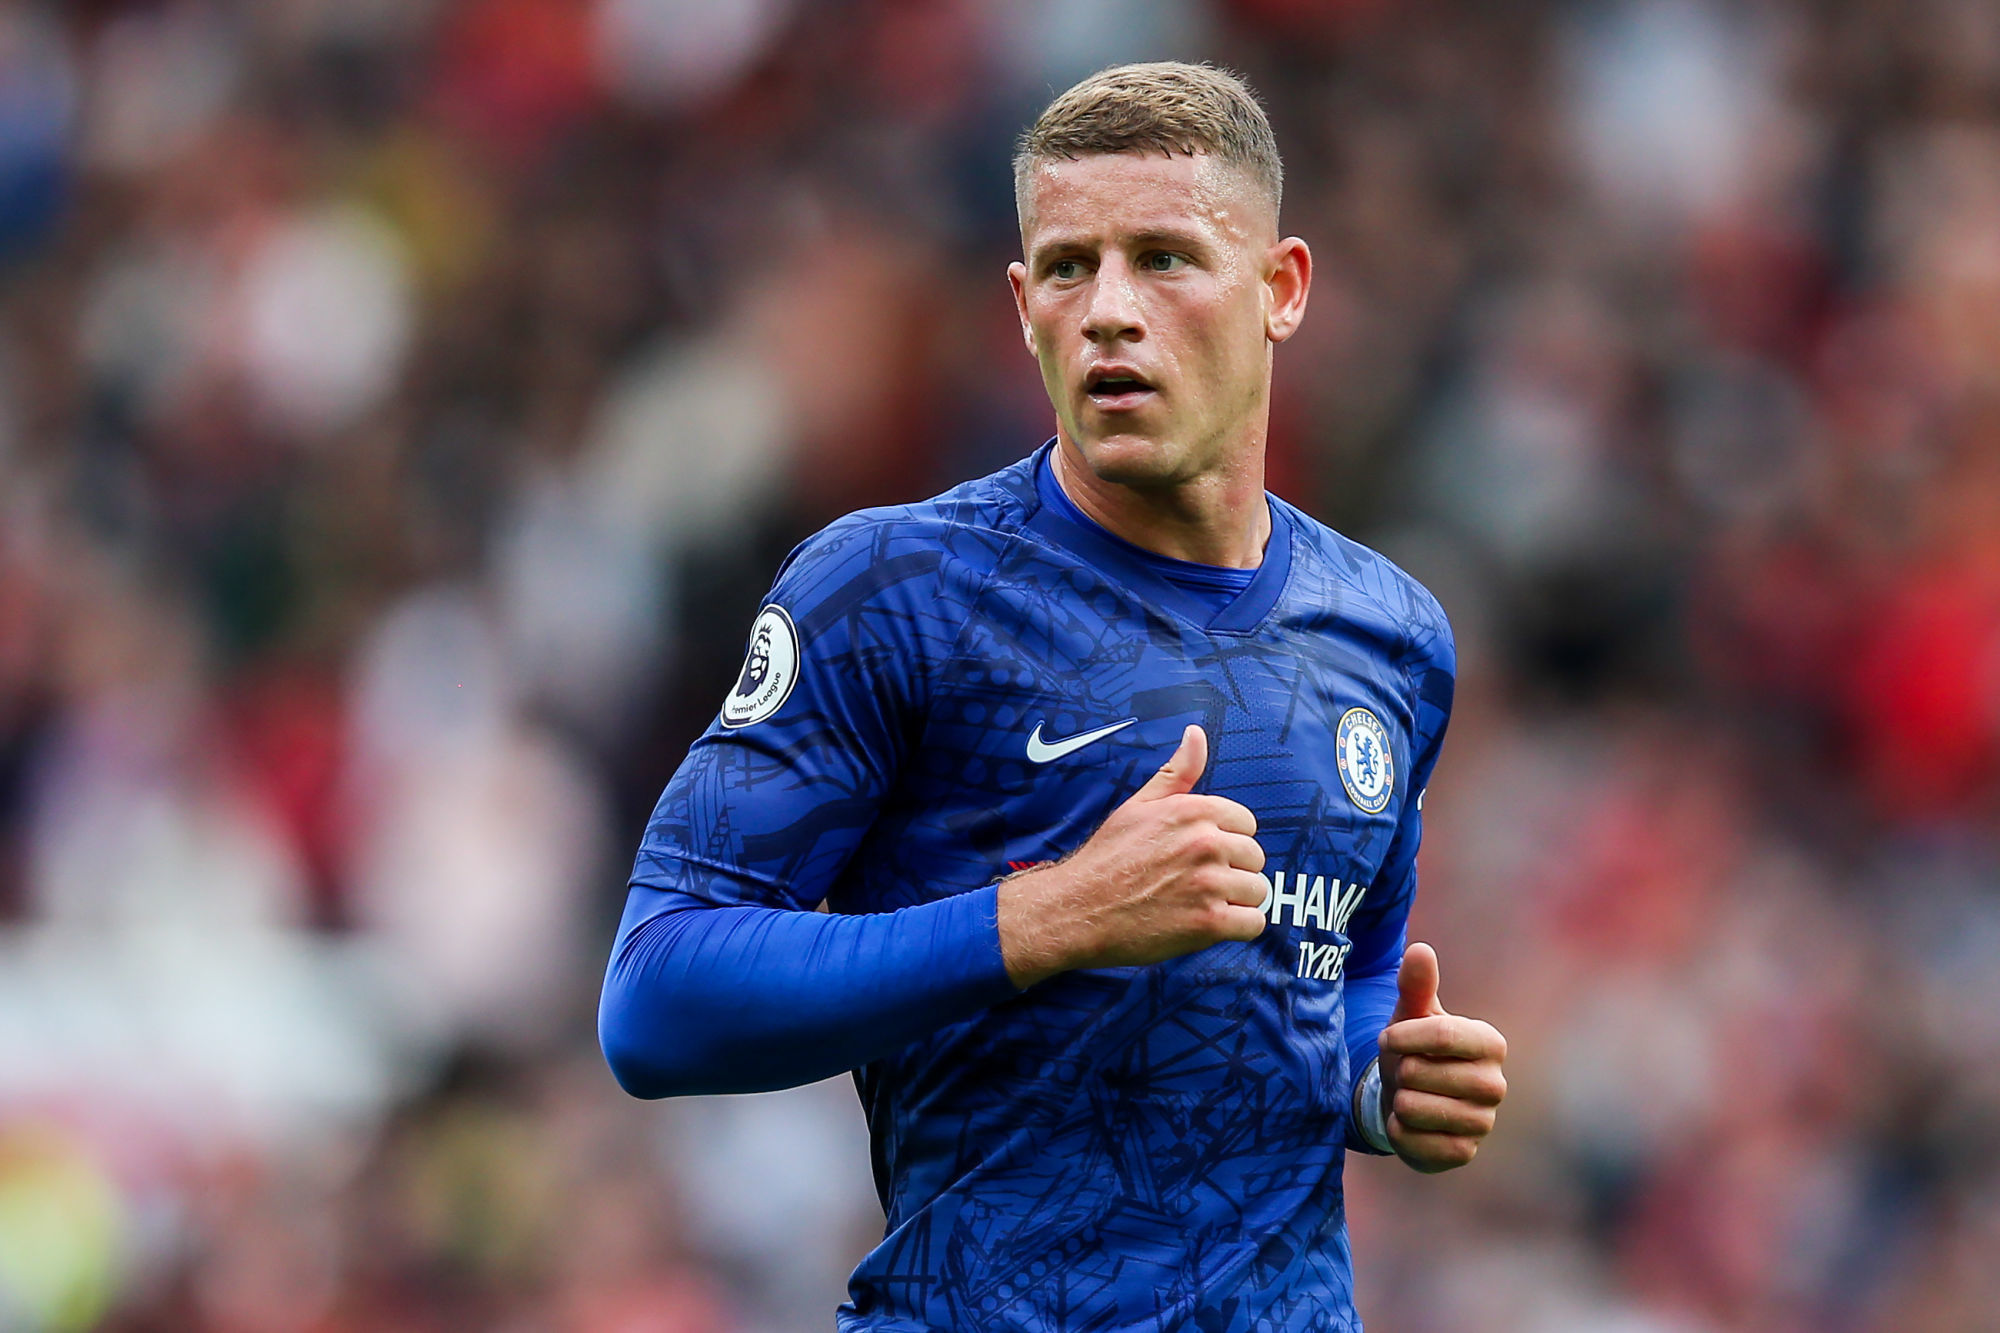 Ross Barkley of Chelsea during the Premier League match at Old Trafford, Manchester between Manchester United and Chelsea on August 11th 2019.

 Photo : Spi / Icon Sport